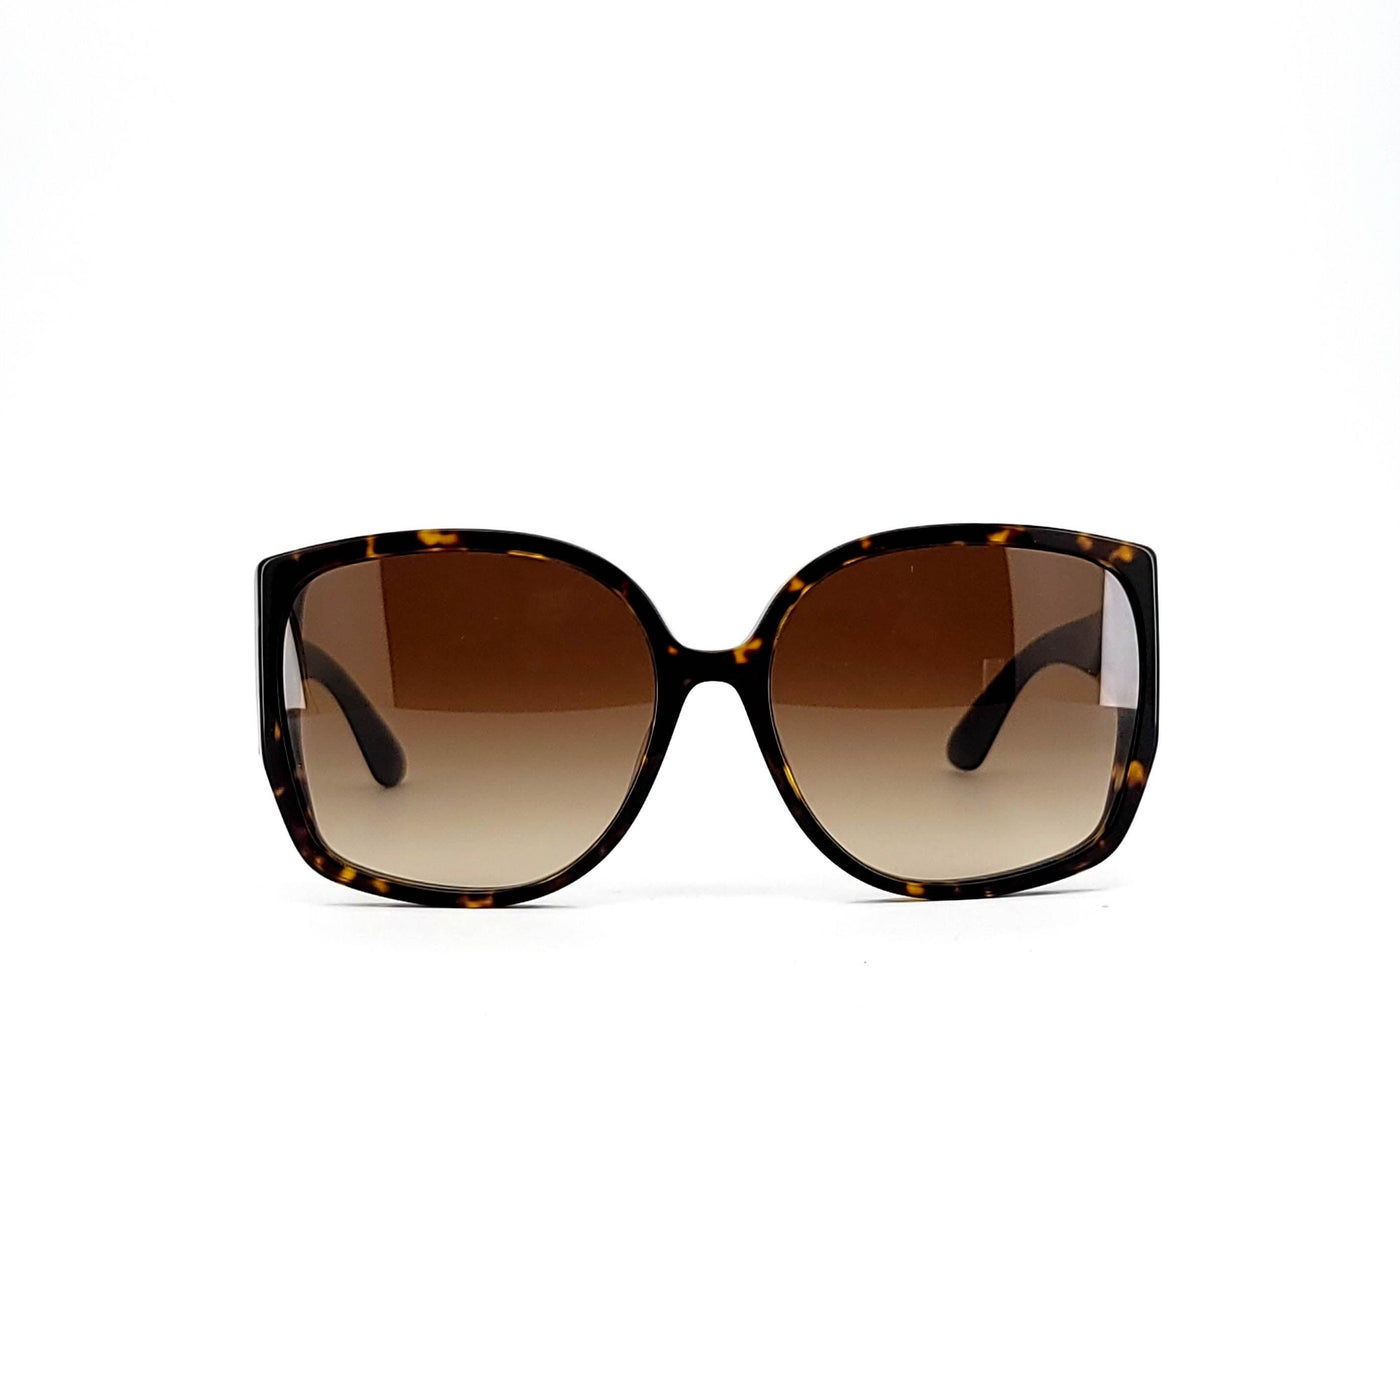 Burberry BE4290F/3002/13 | Sunglasses - Vision Express Optical Philippines